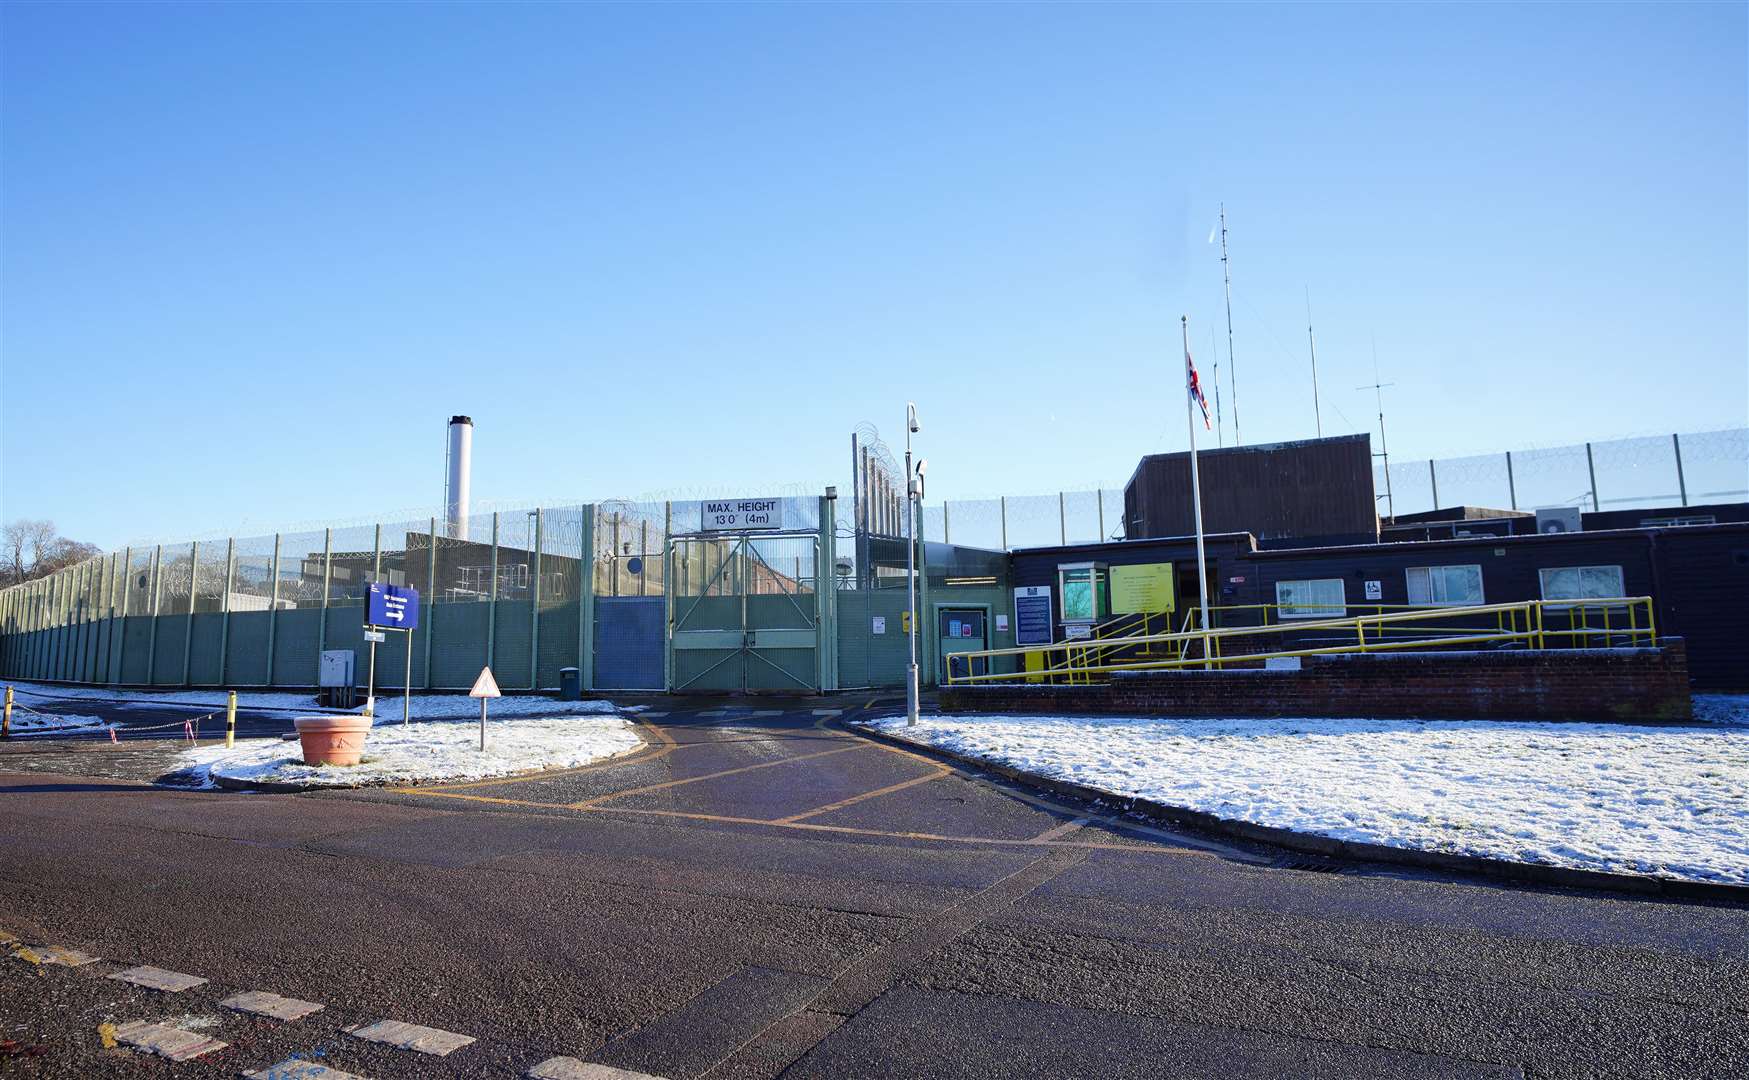 HMP Huntercombe in Oxfordshire, where Boris Becker is understood to have served his sentence before being flown back to Germany (PA)